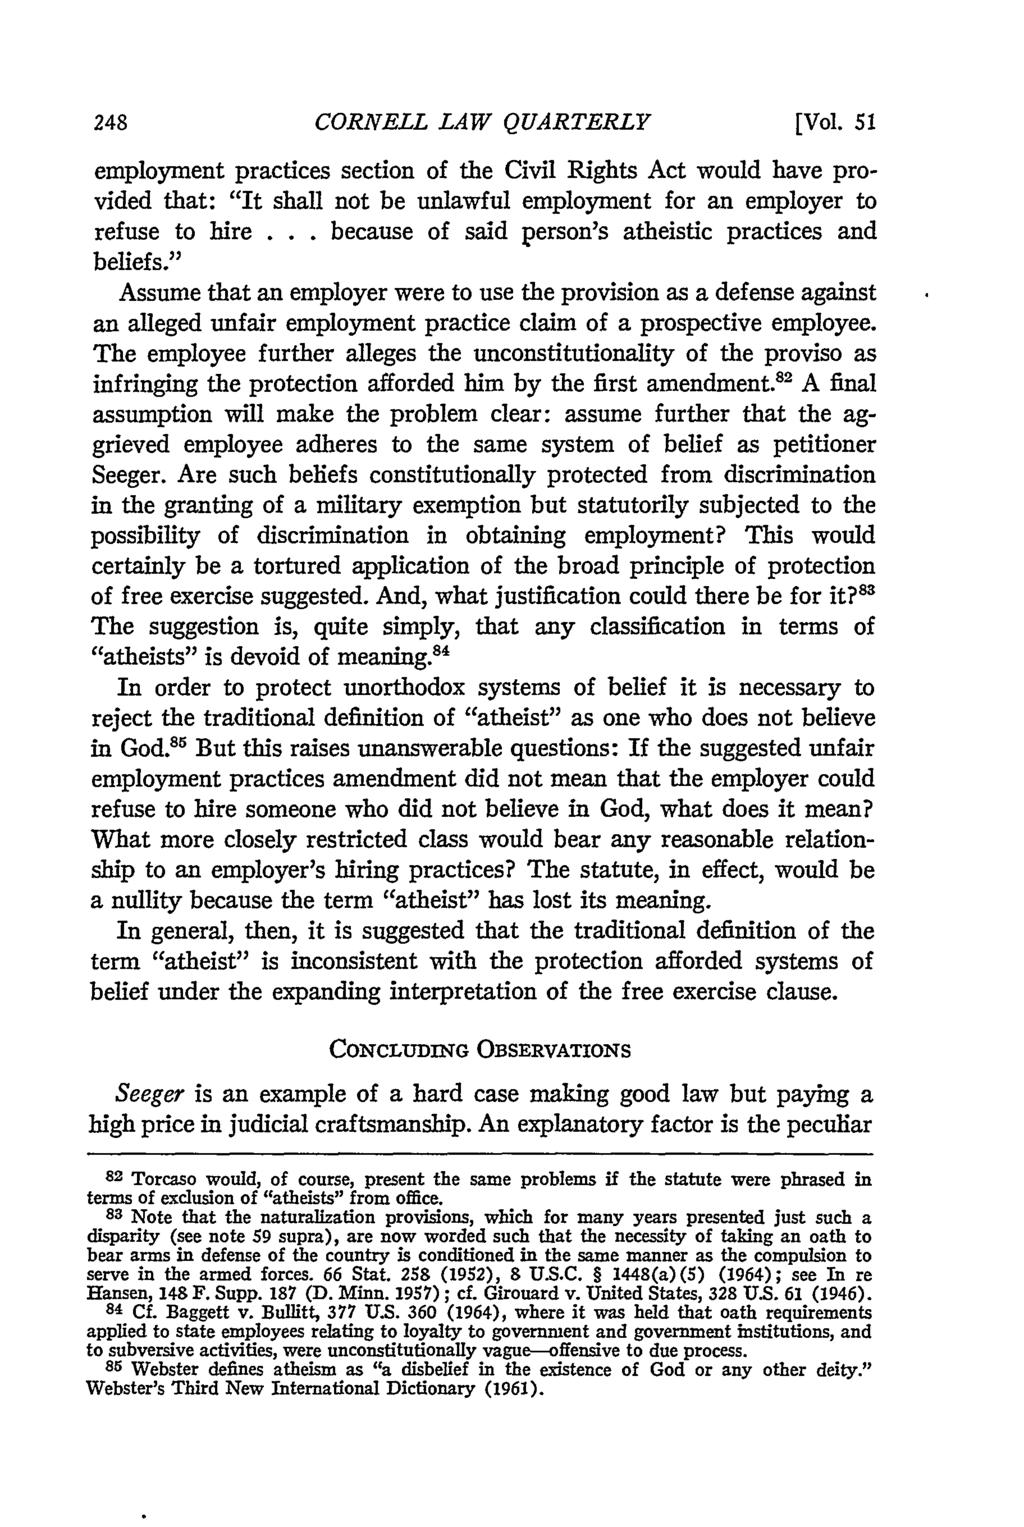 CORNELL LAW QUARTERLY [Vol. 51 employment practices section of the Civil Rights Act would have provided that: "It shall not be unlawful employment for an employer to refuse to hire.